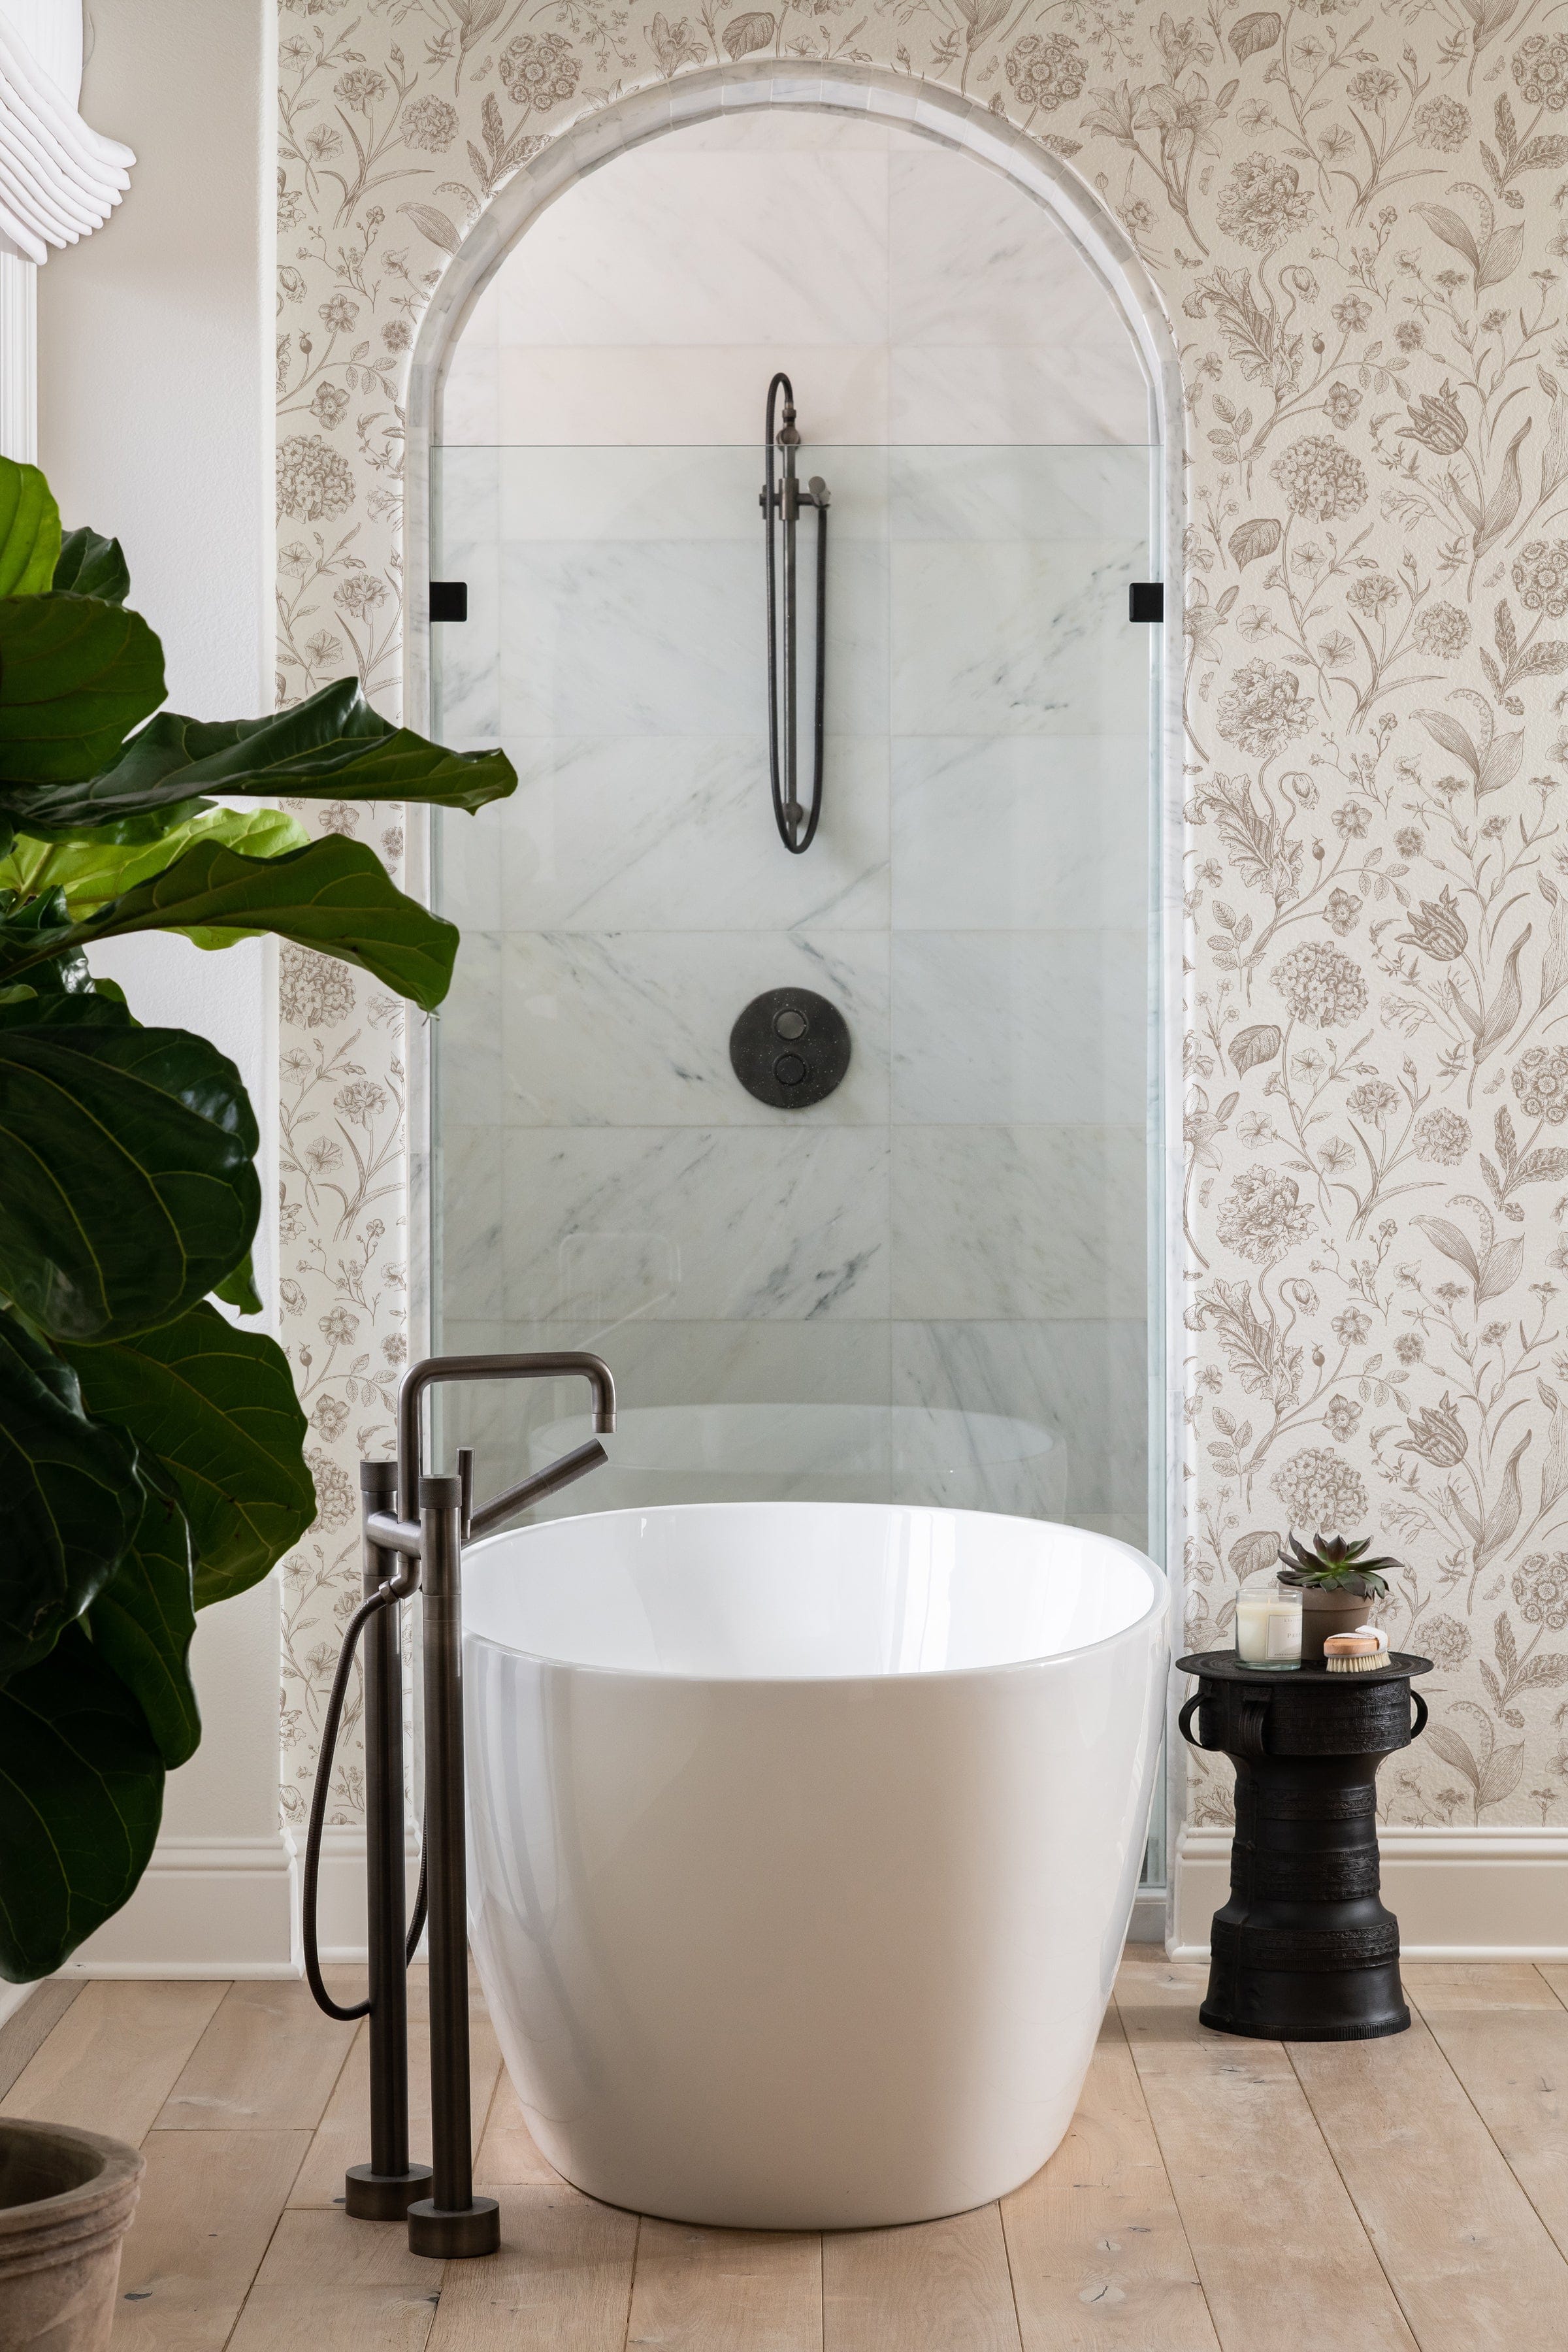 A modern bathroom combines contemporary design with classical elements, featuring Toile De Jouy Floral Wallpaper alongside a sleek white freestanding tub. The floral wallpaper adds a touch of traditional elegance to the space.